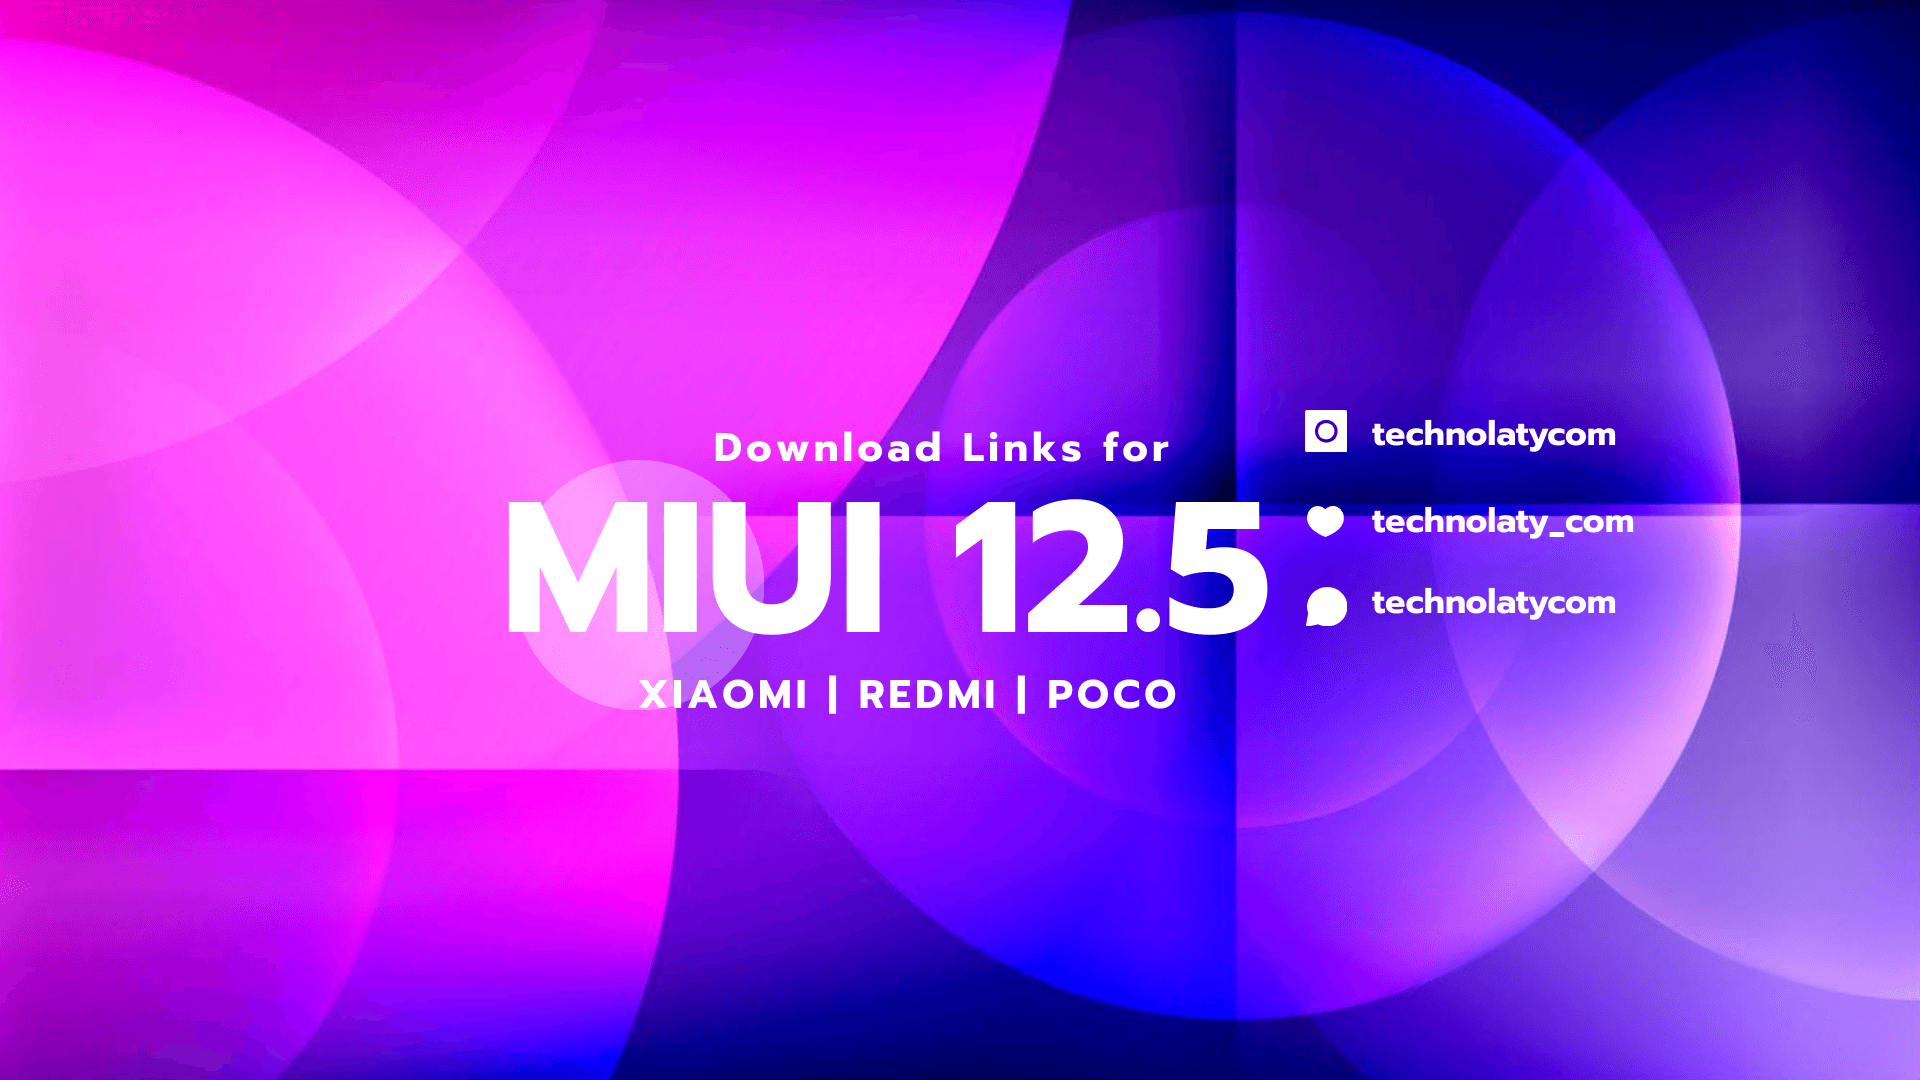 Download Links For MIUI 12.5